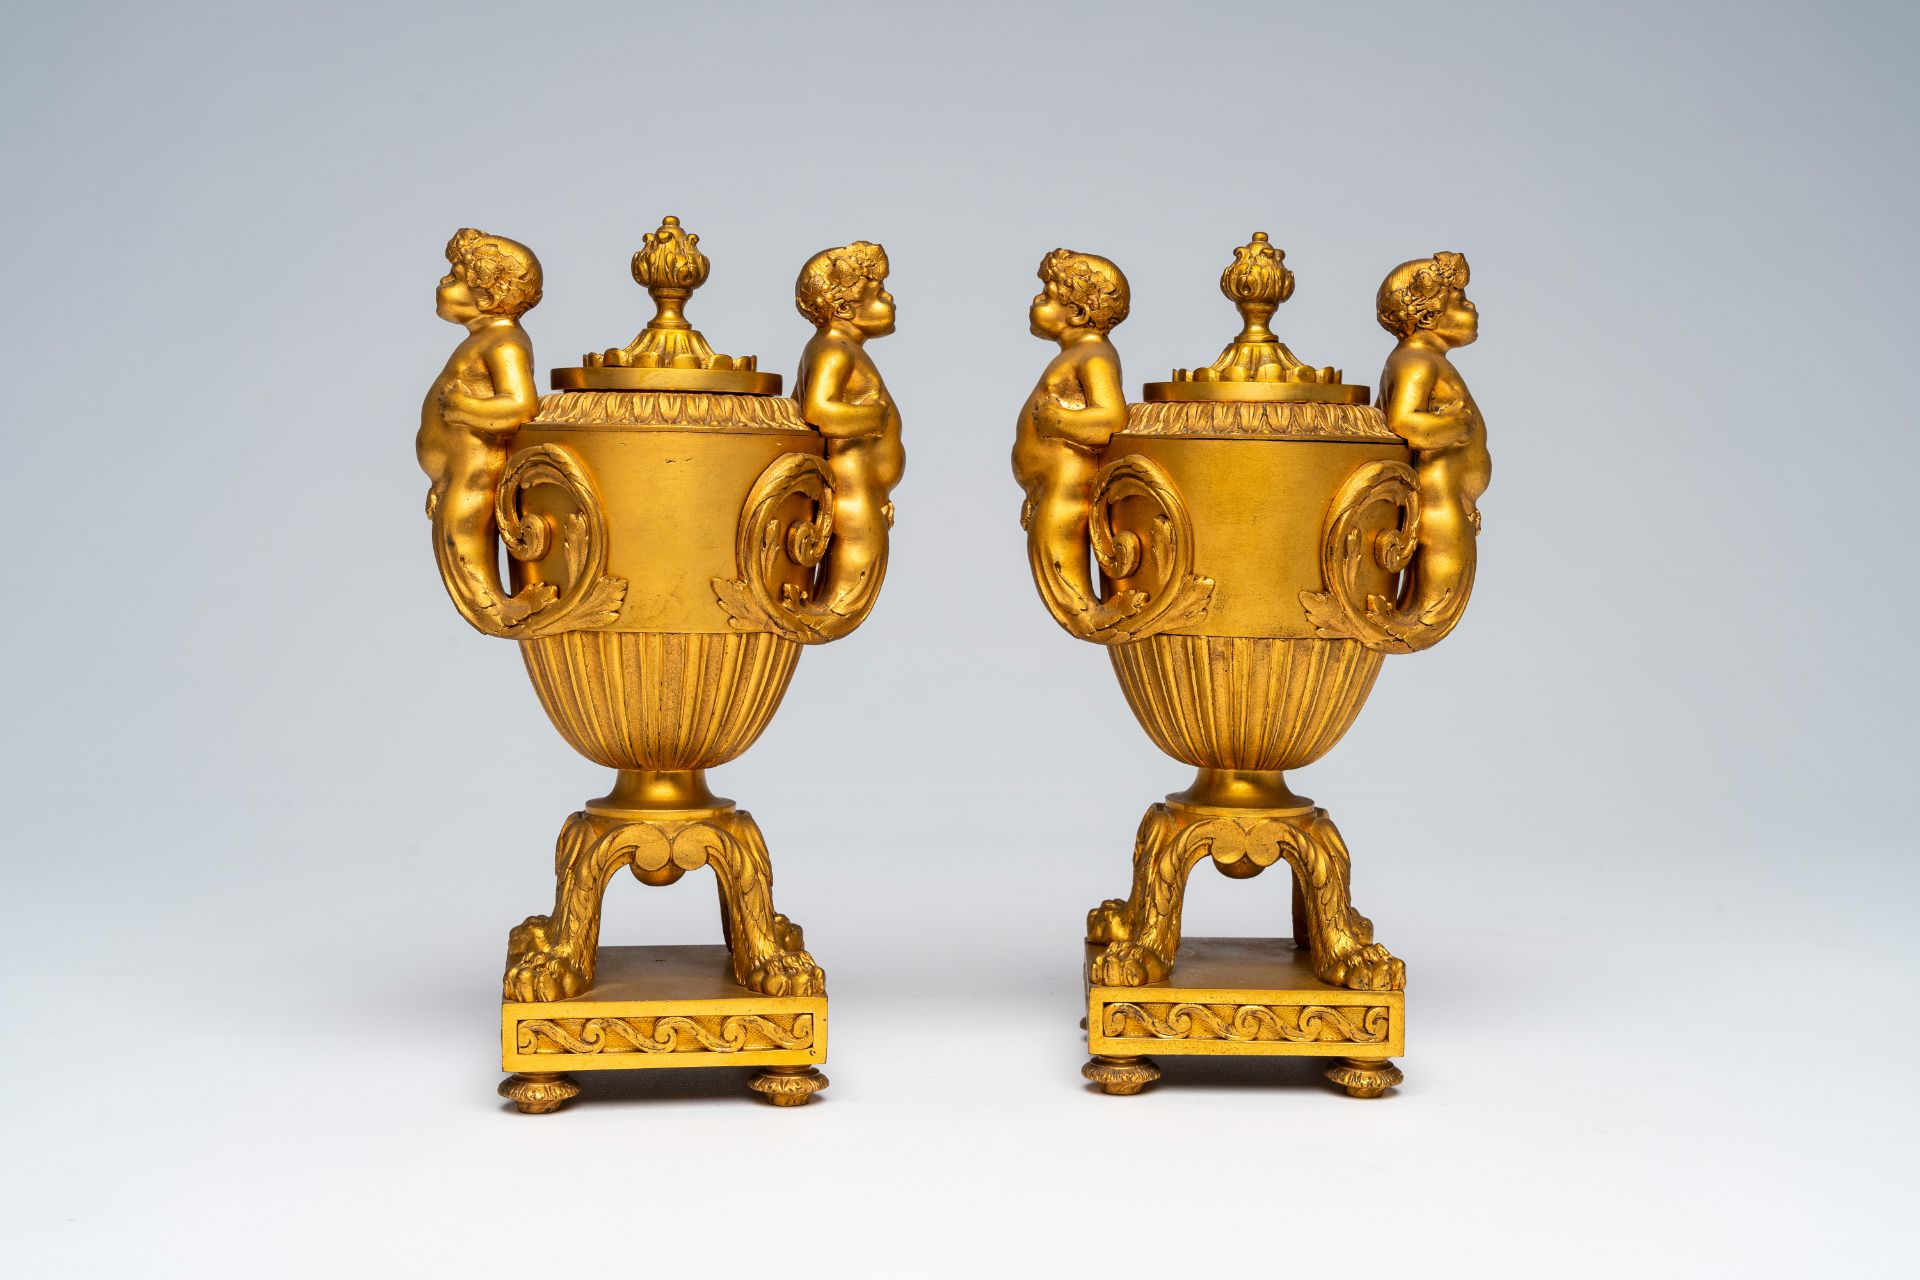 A pair of French gilt bronze vases and covers with bacchantes and lion's feet convertible into candl - Image 5 of 8